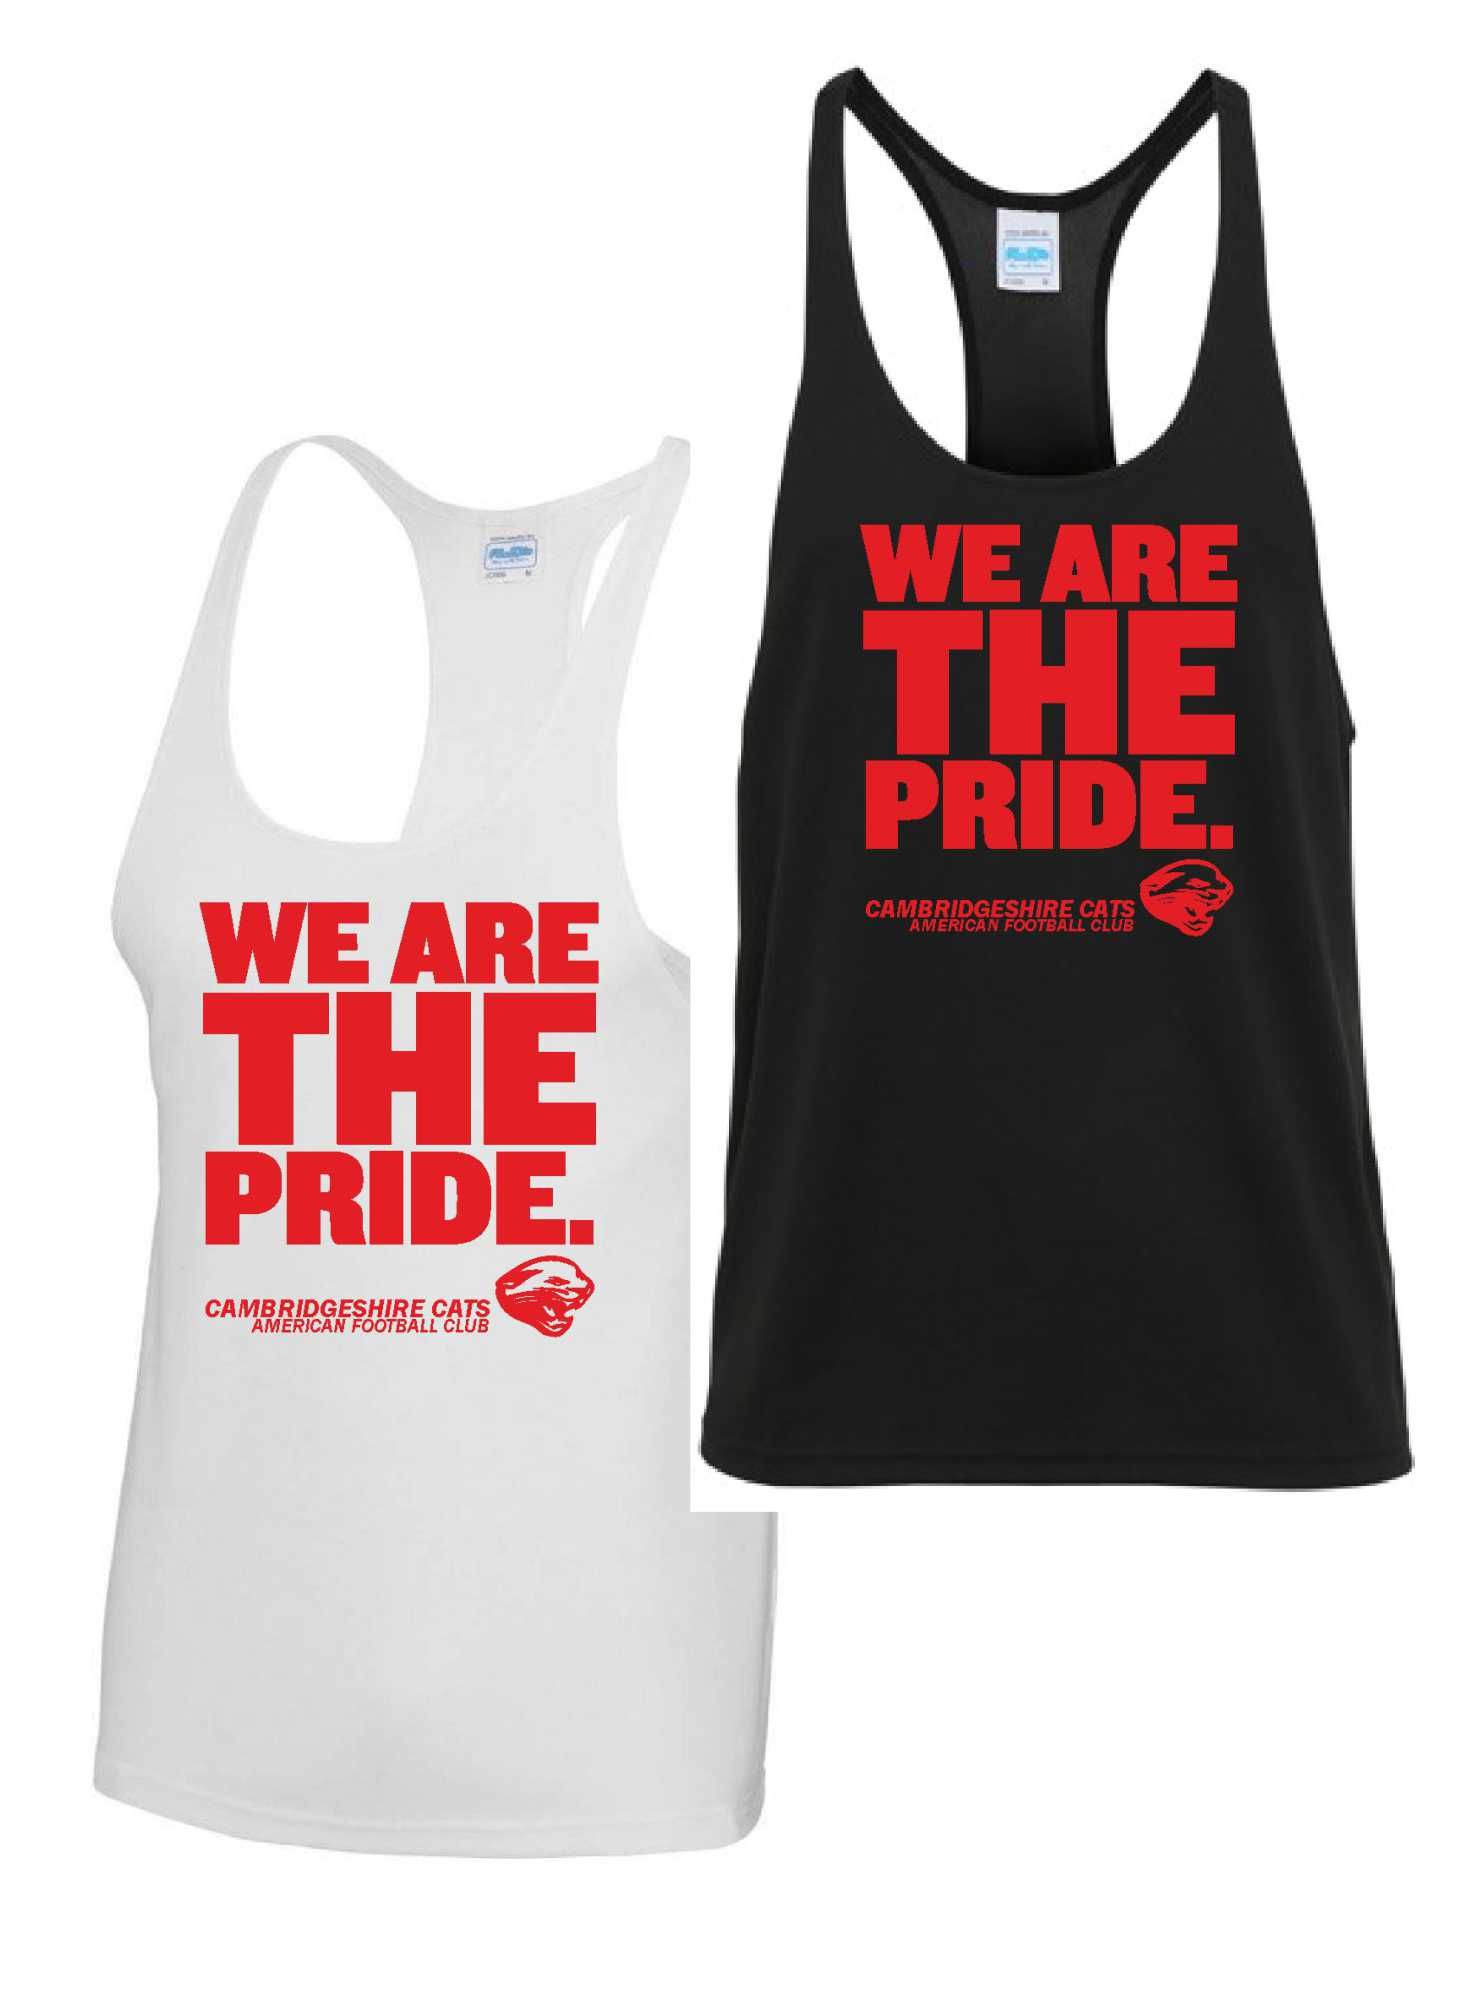 Cats - 'We Are The Pride' Muscle Vest